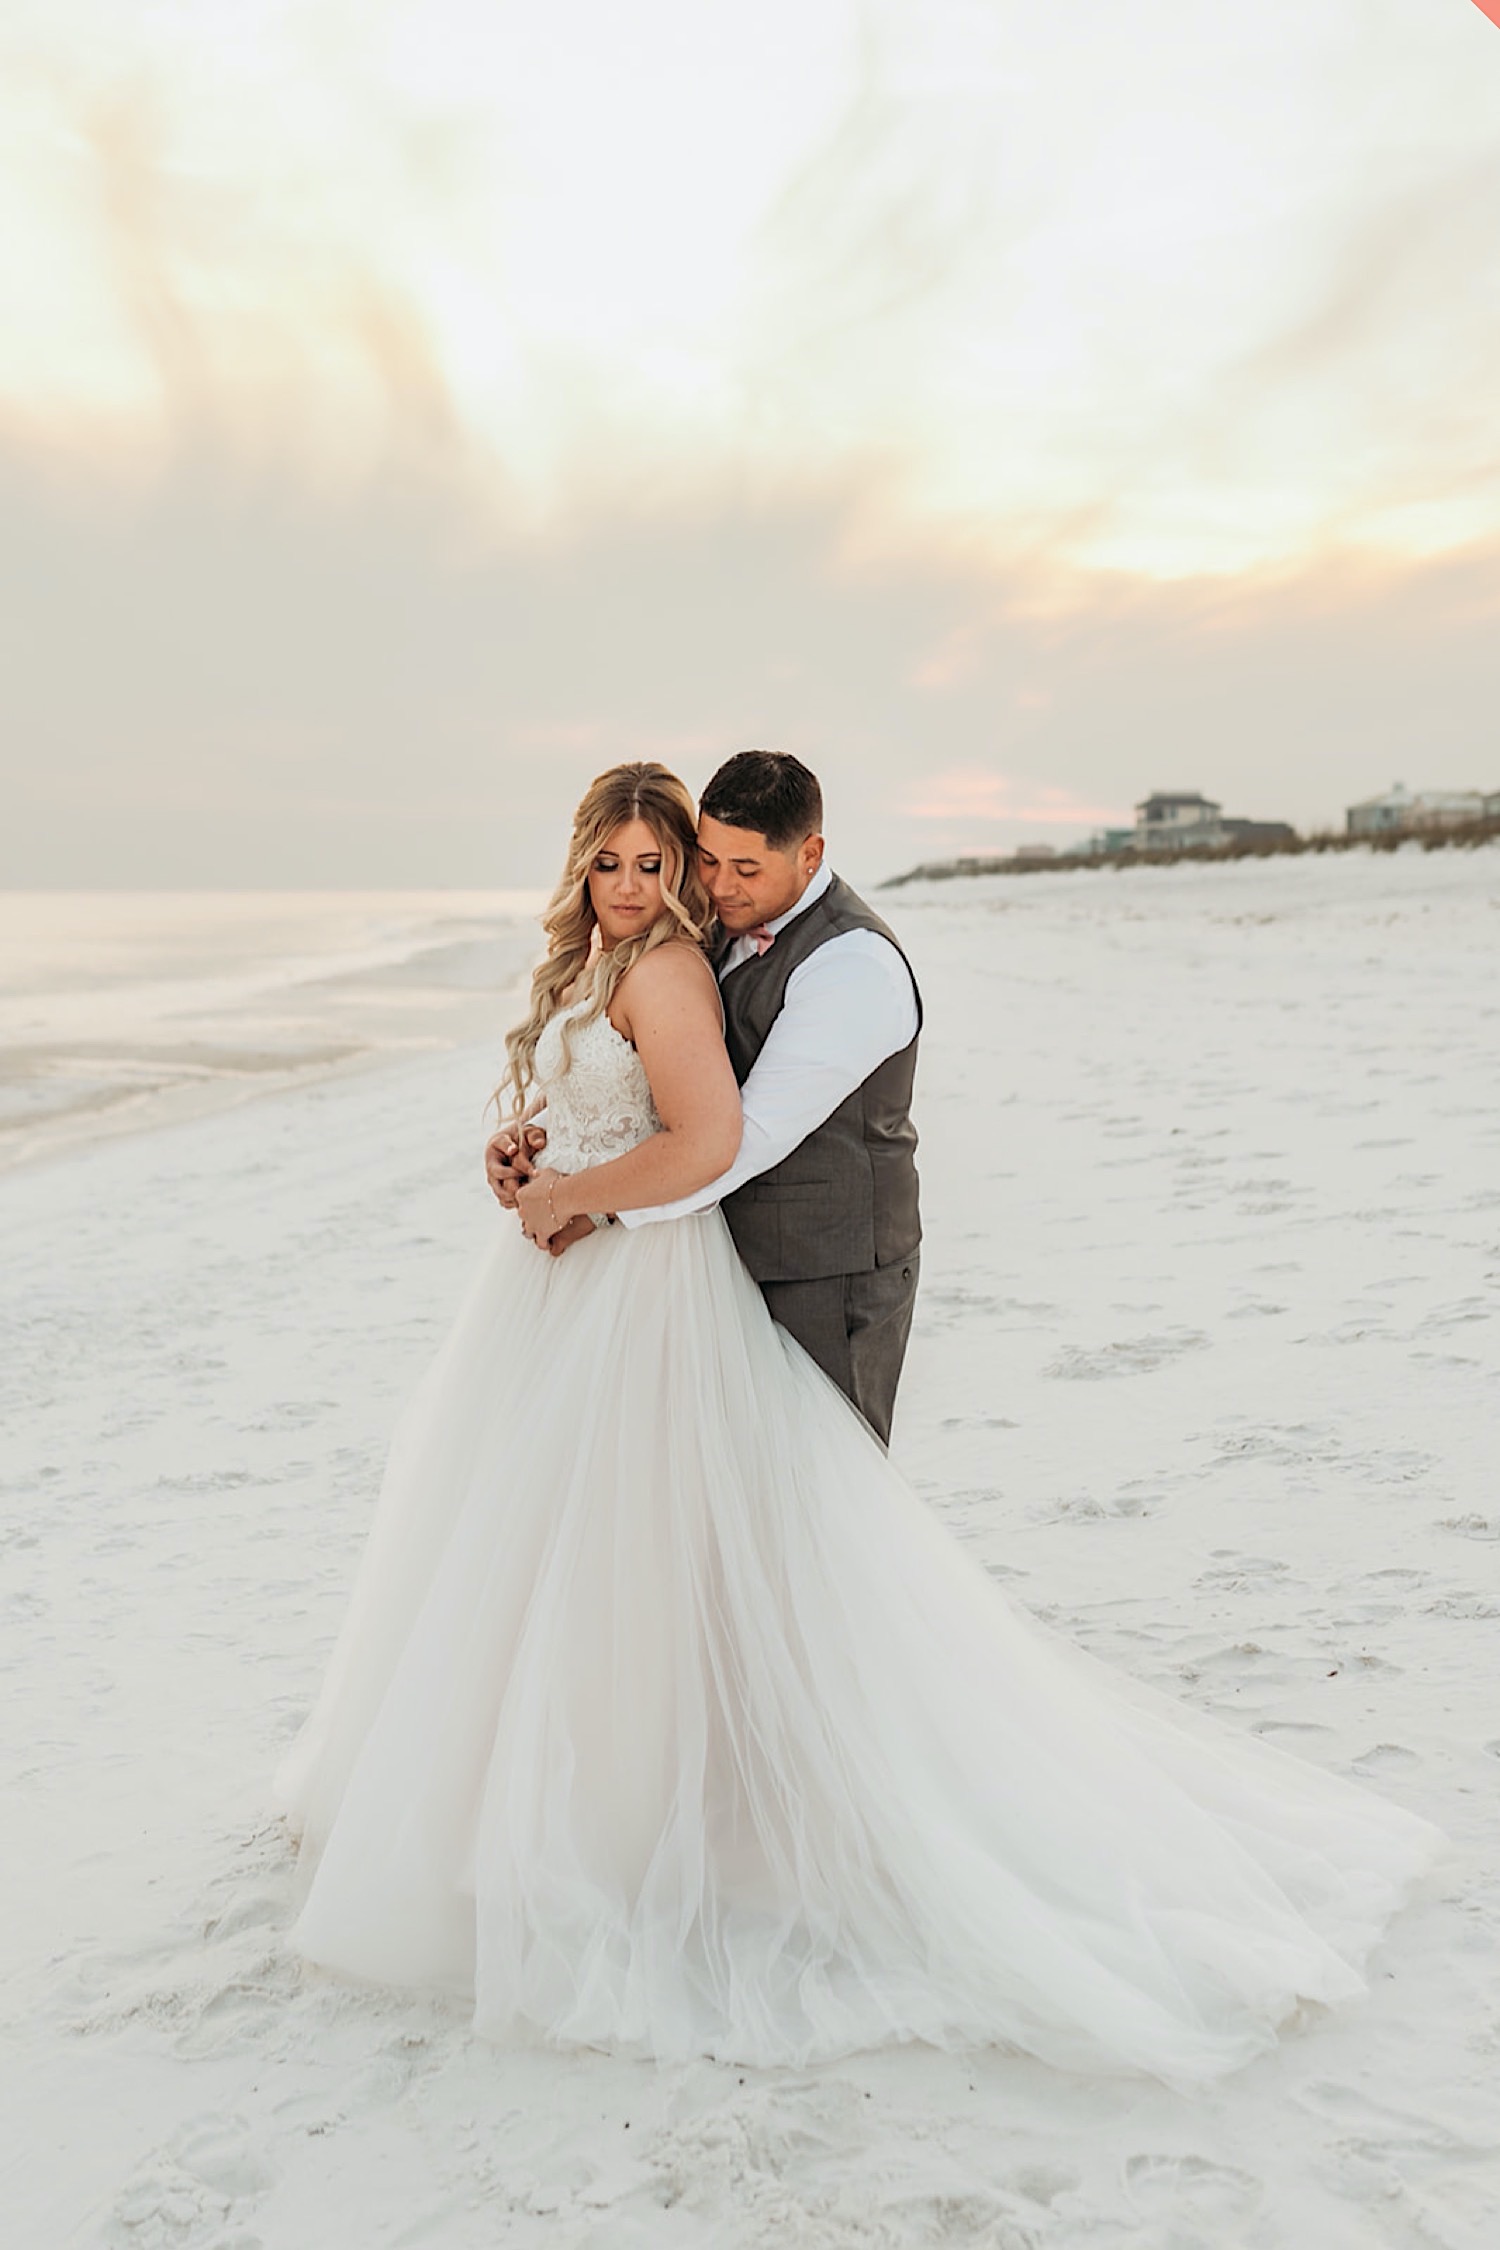 Sunset photos with Bride and Groom